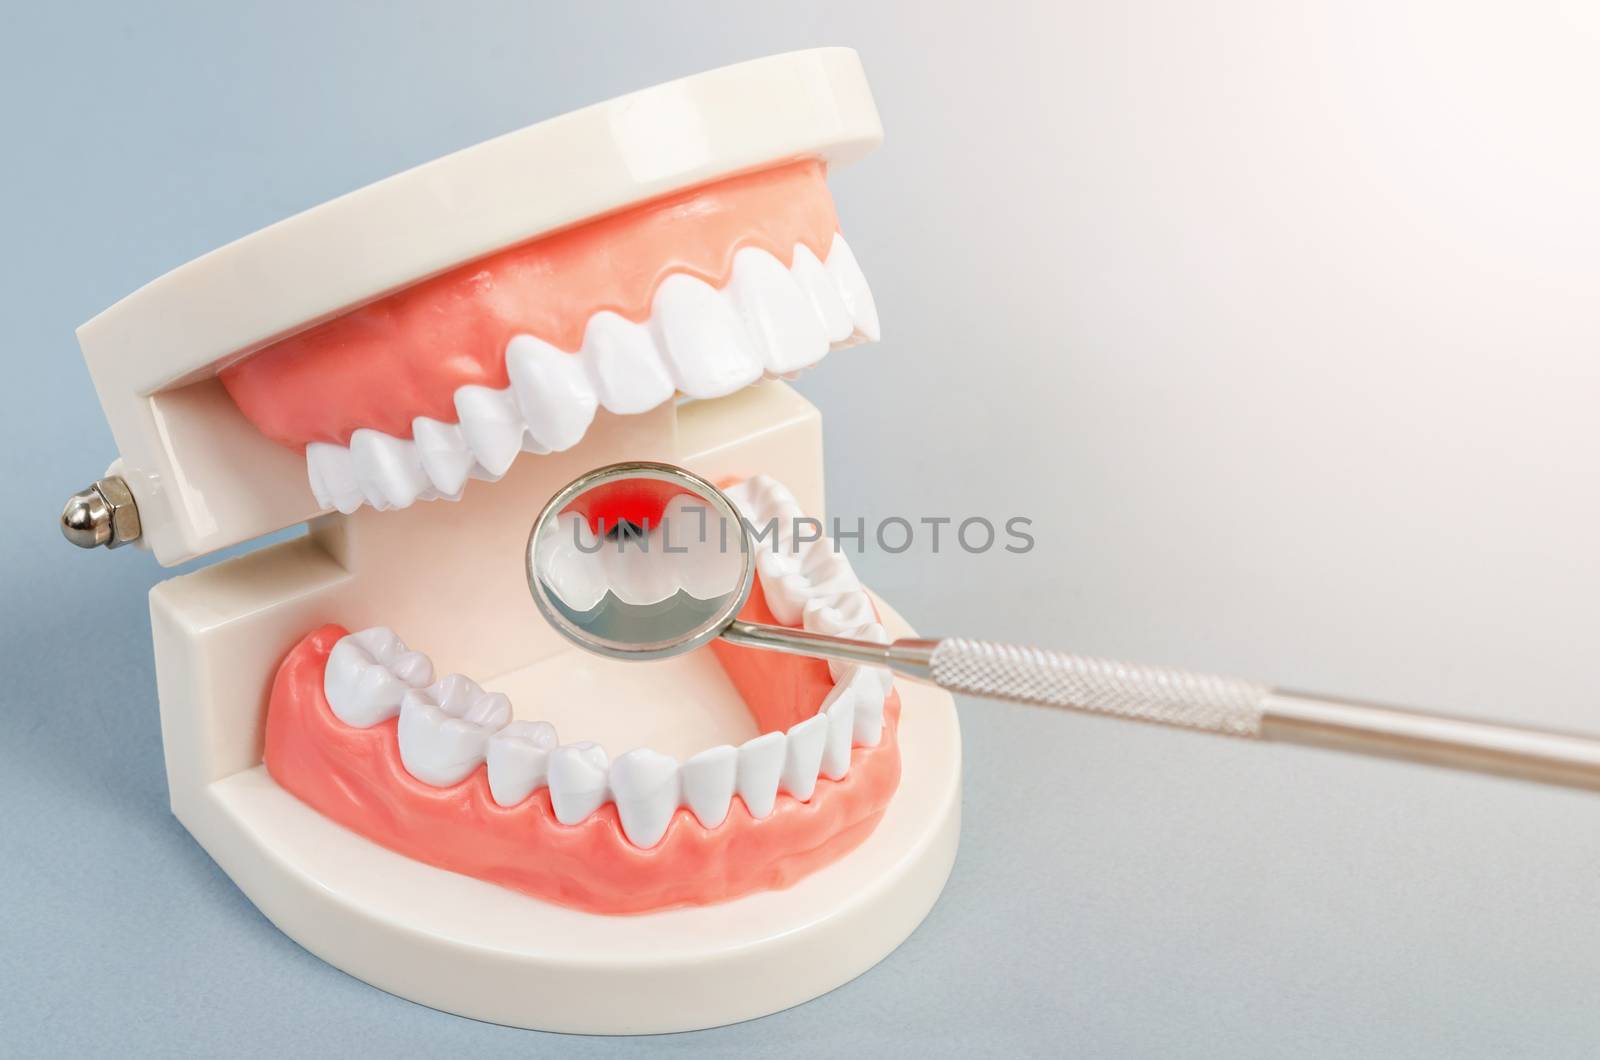 Tooth dental caries on denture with equipment dental. Dental concept.